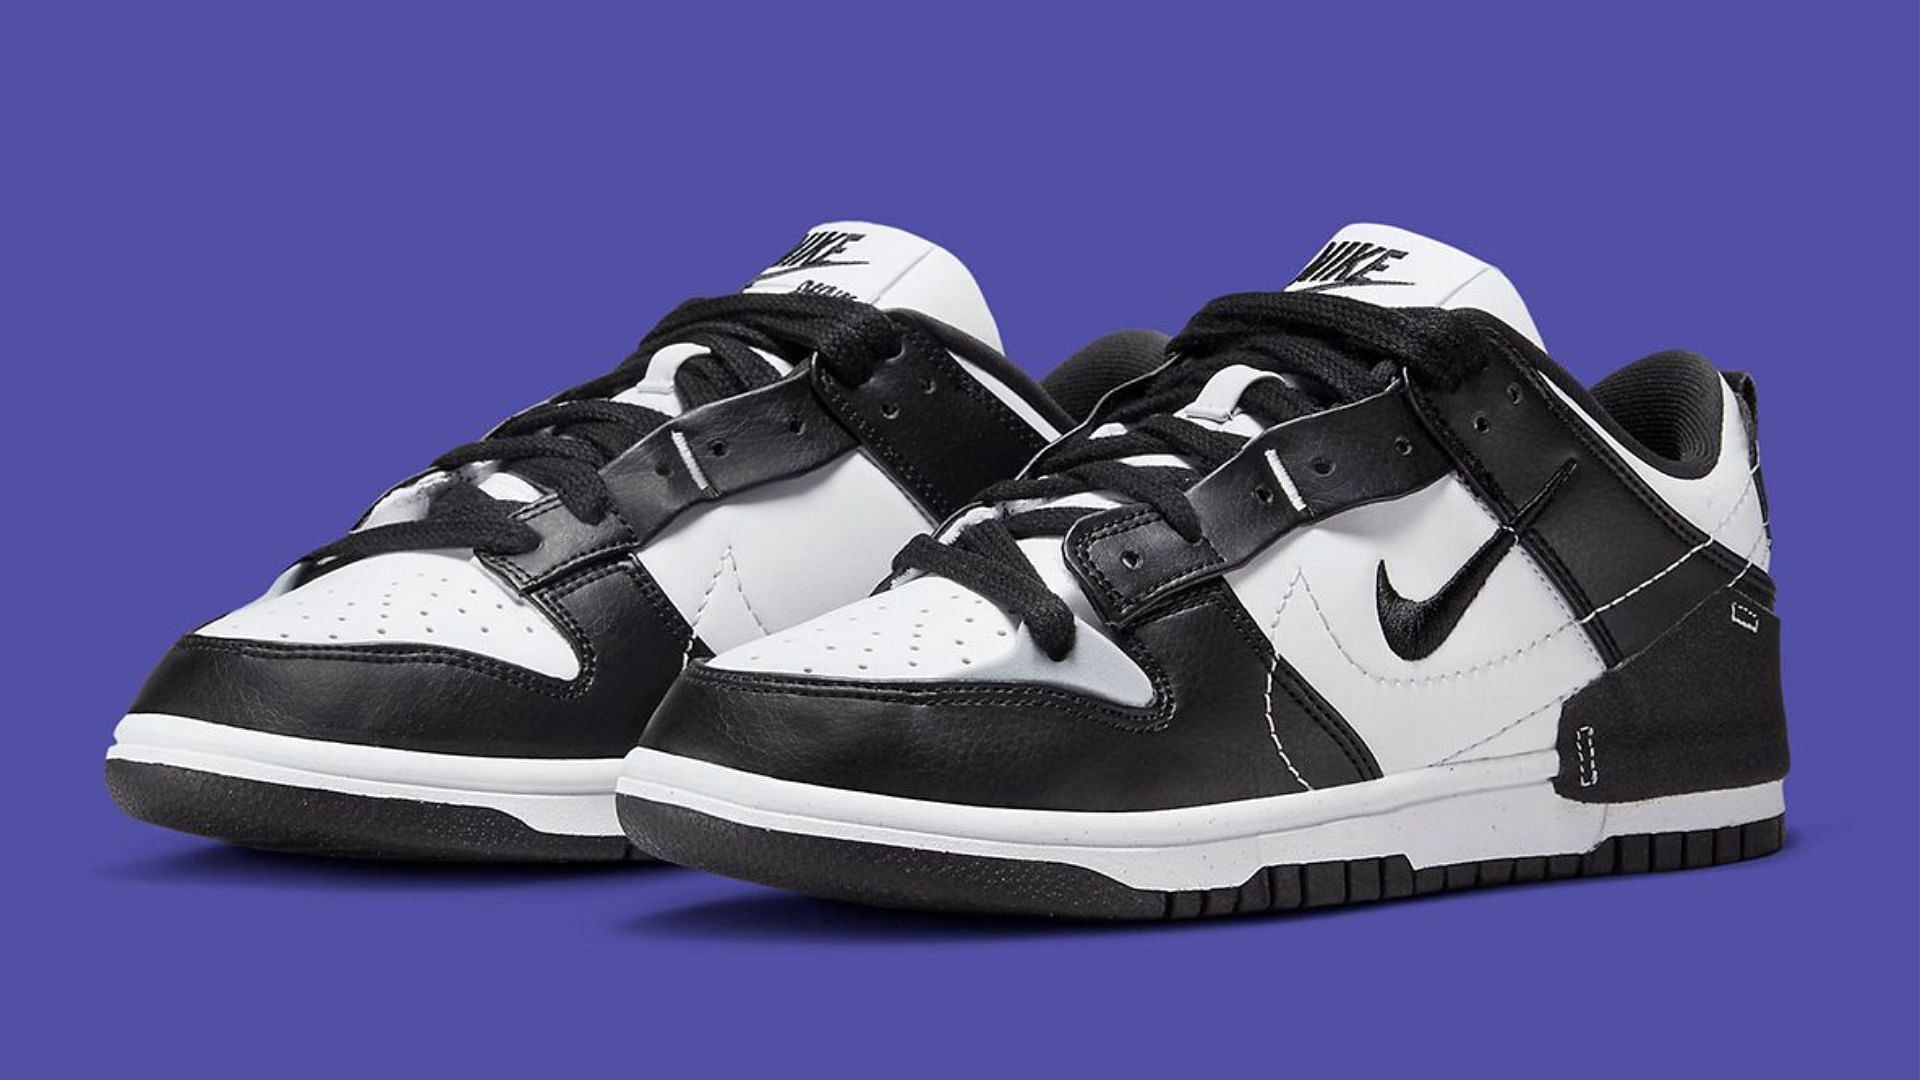 Where to buy Nike Dunk Low Disrupt 2 Panda shoes? Price and more